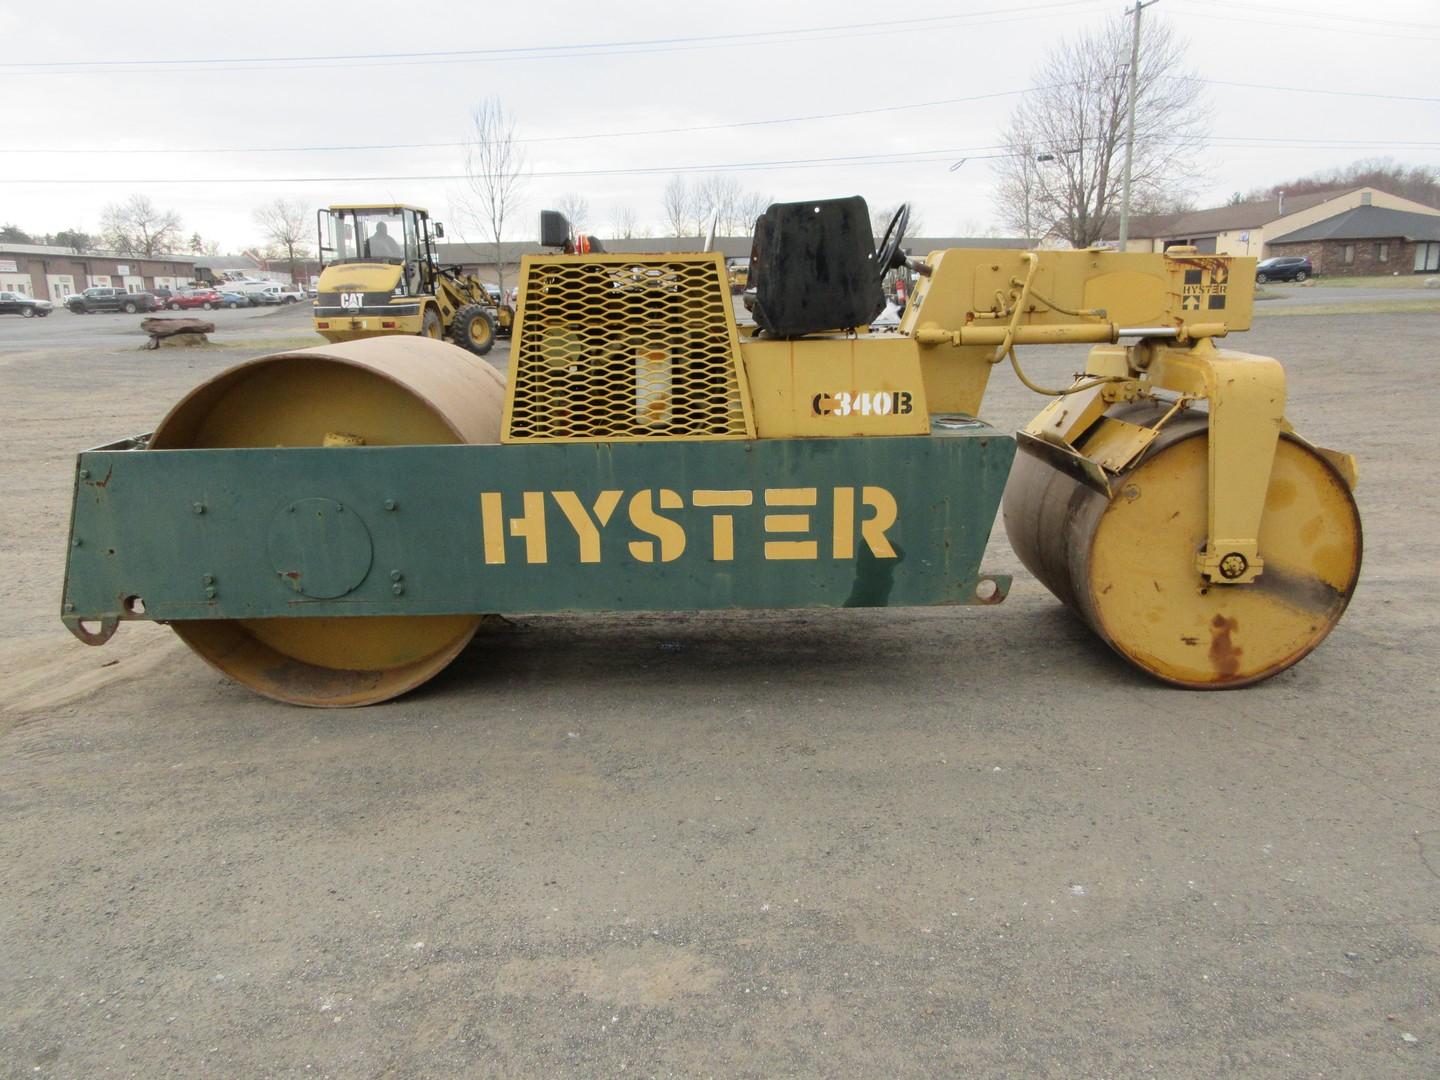 Hyster C340B Double Drum Roller